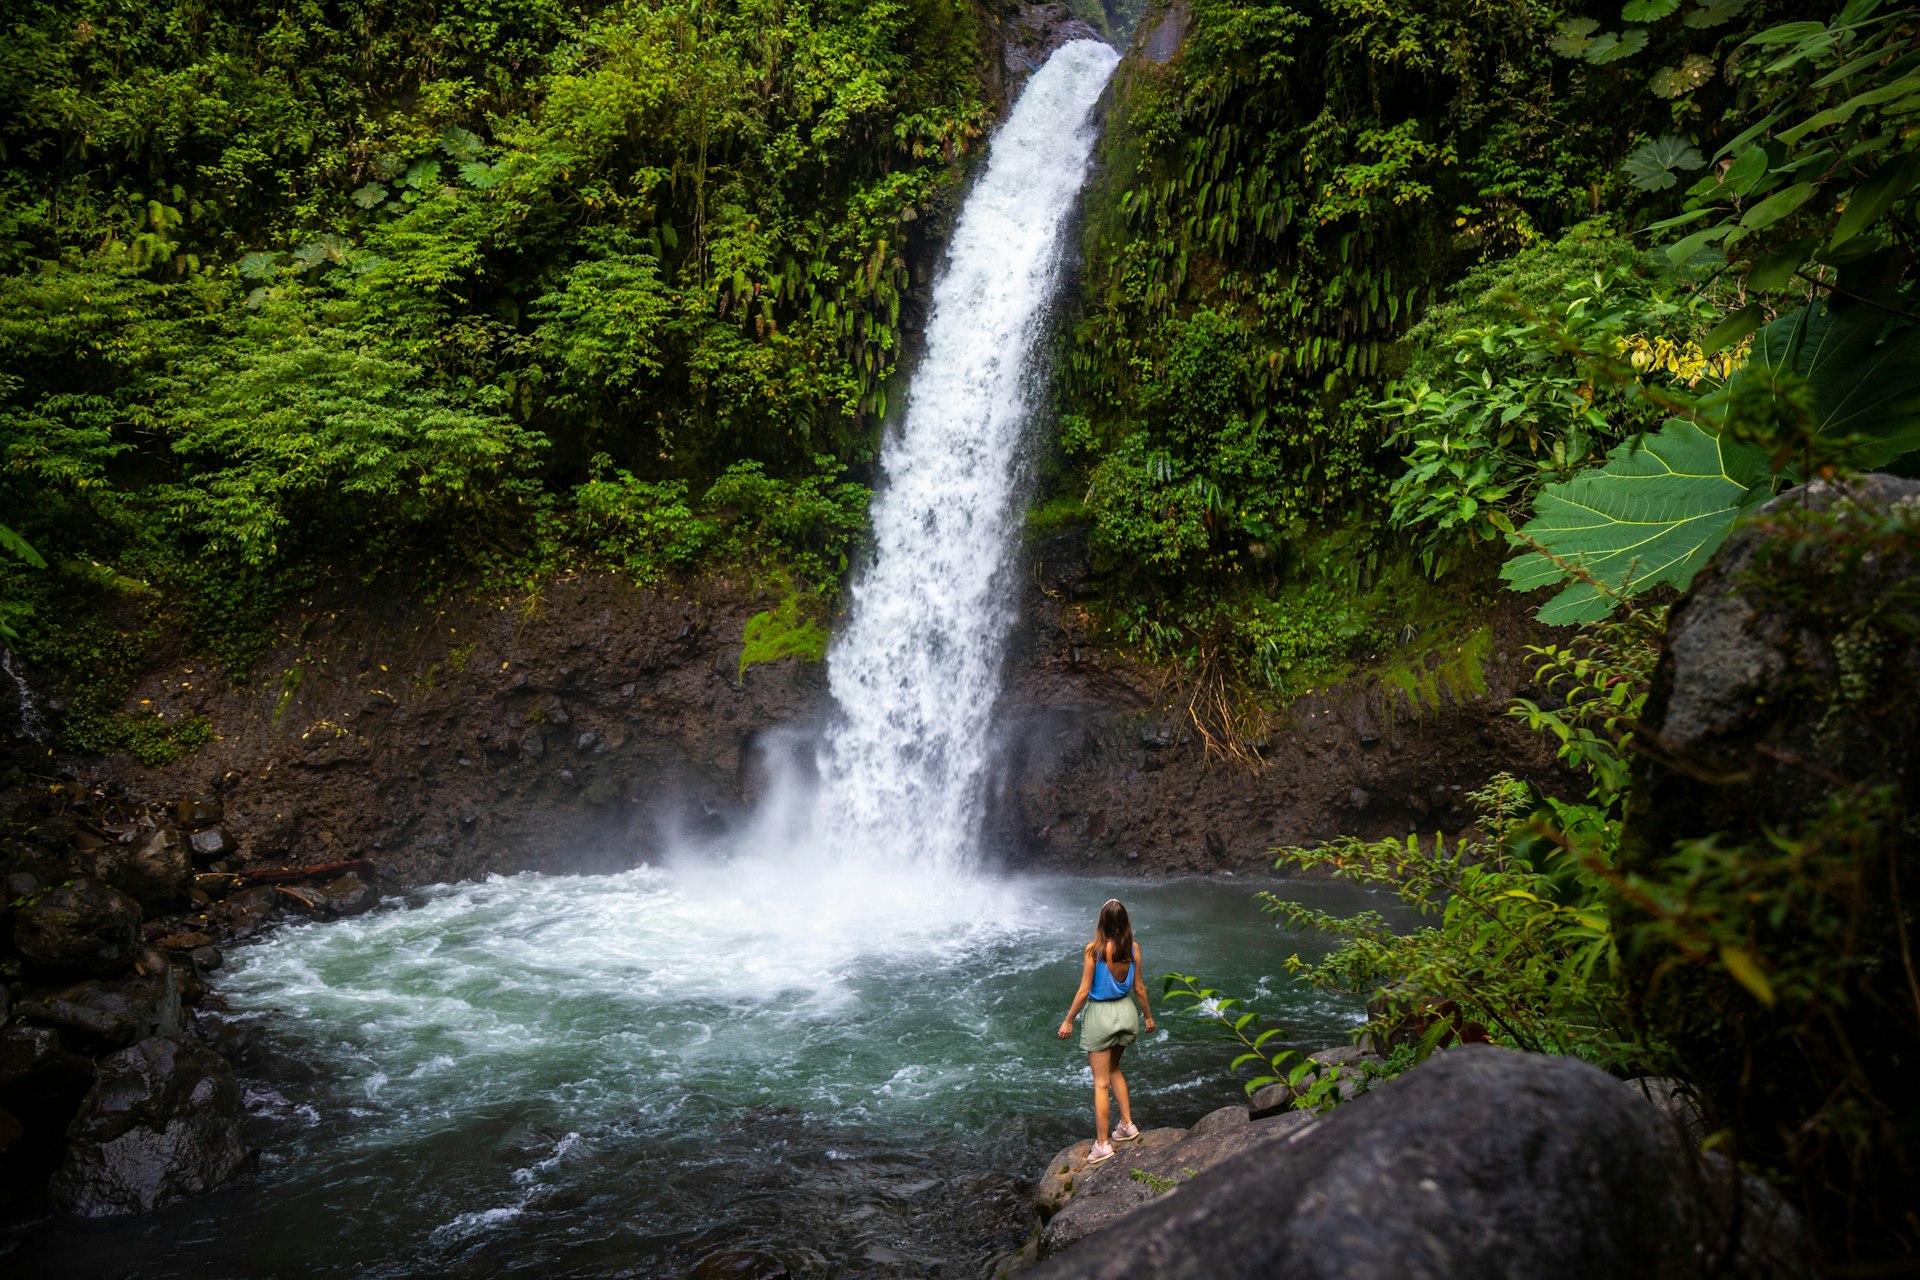 A woman stands on a rock at the edge of a pool with a waterfall plunging into it